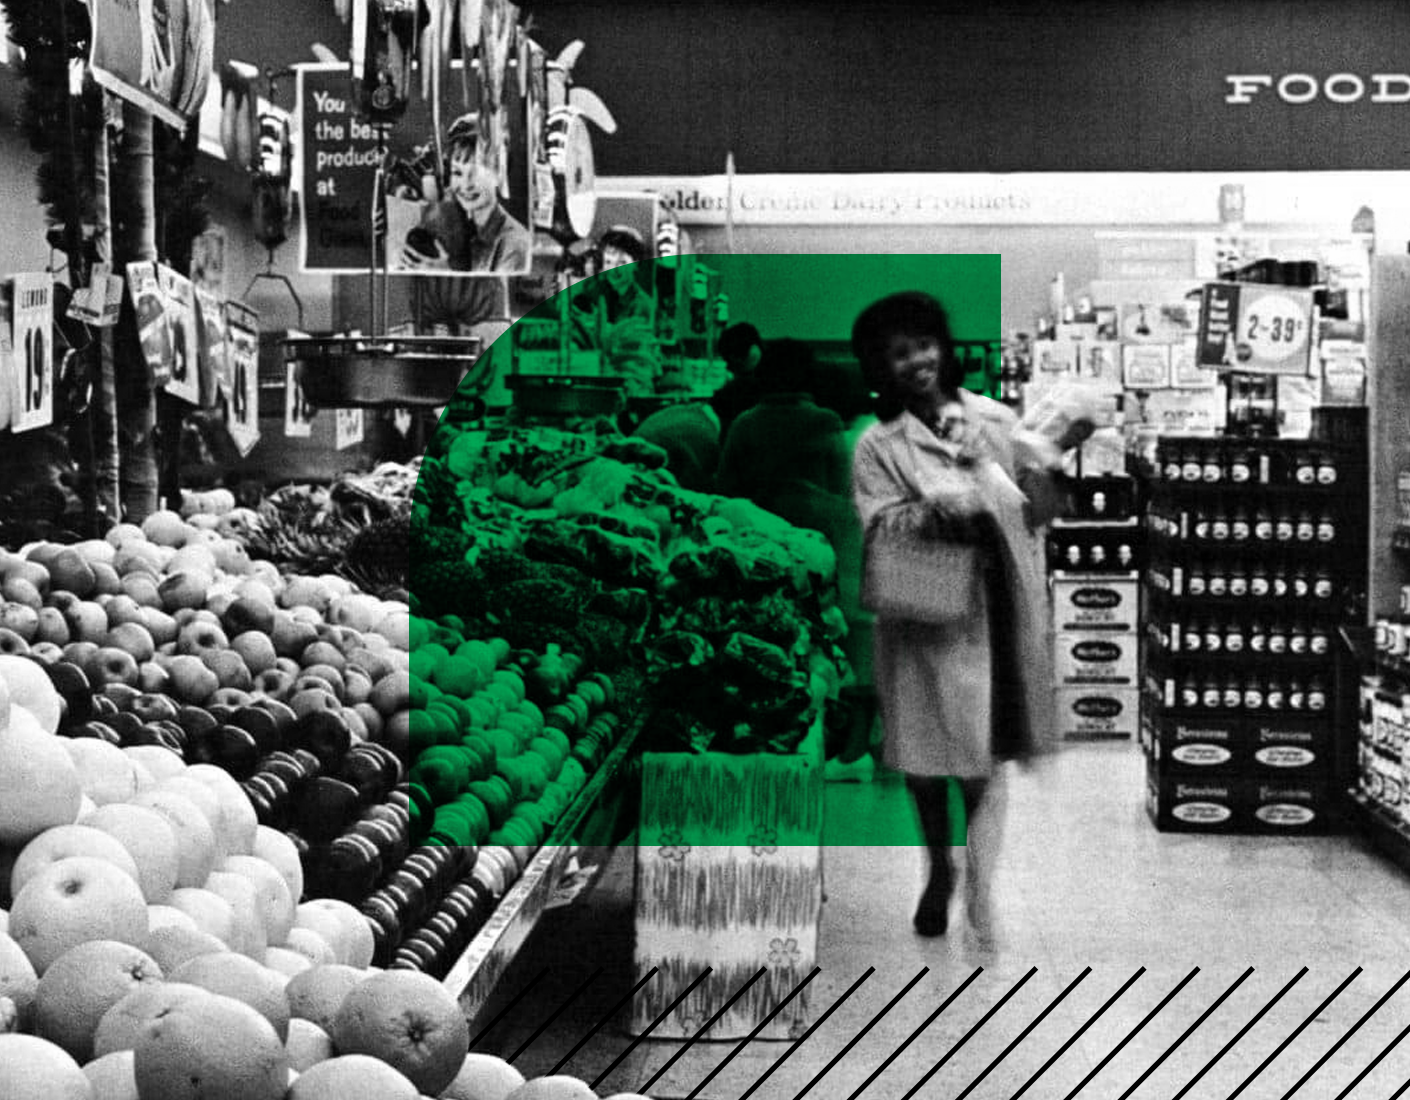 a vintage image of a woman in supermarket